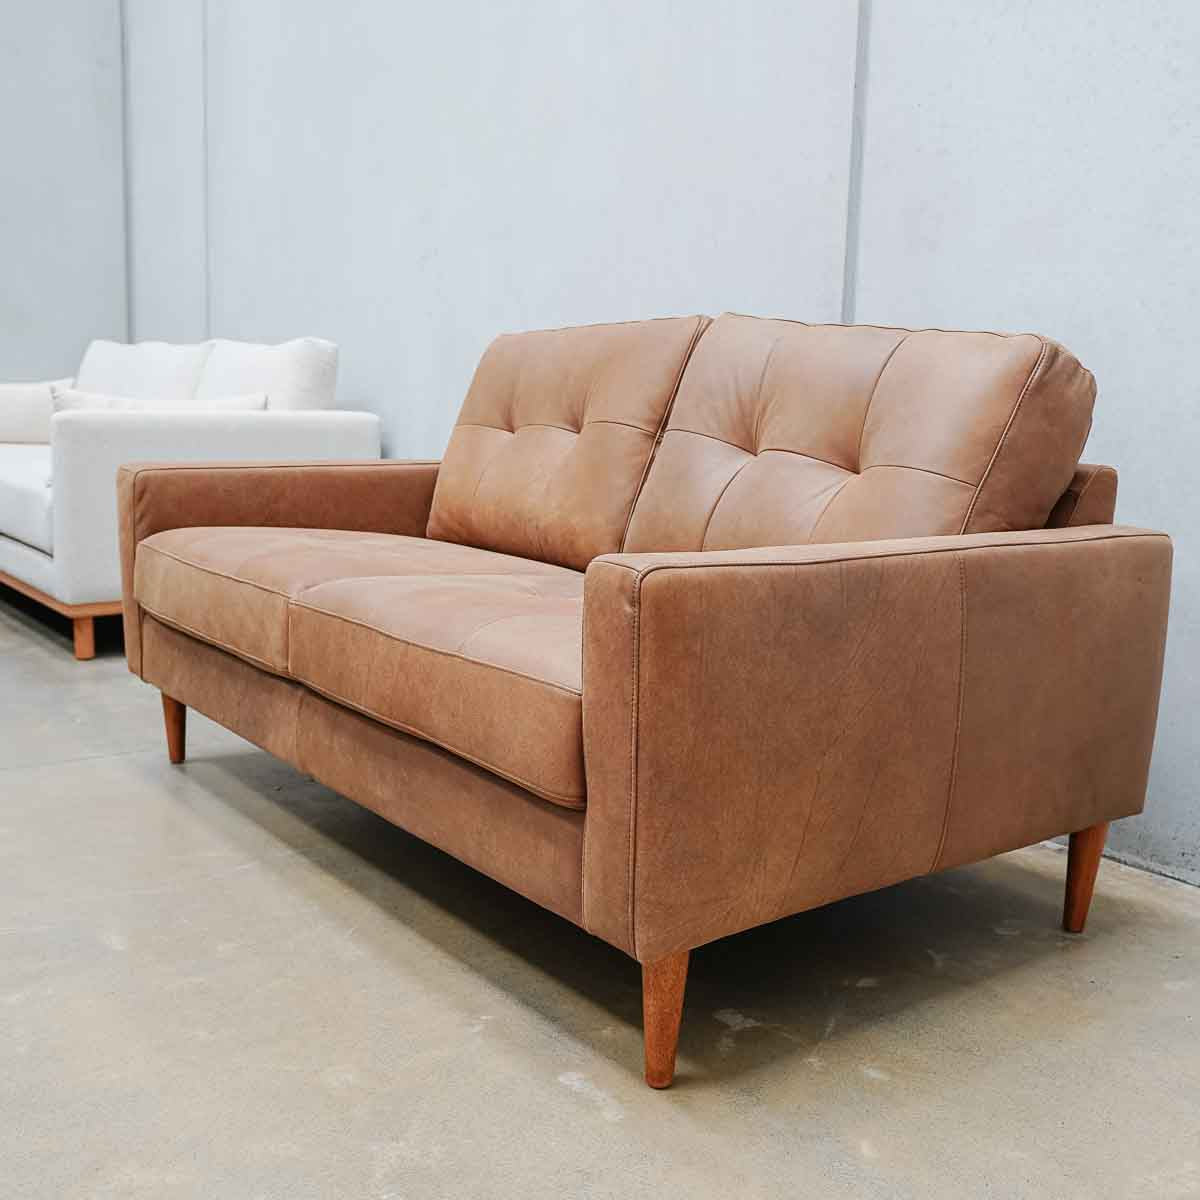 Imperfect Classic Leather 2.5 Seat in Brumby Natural